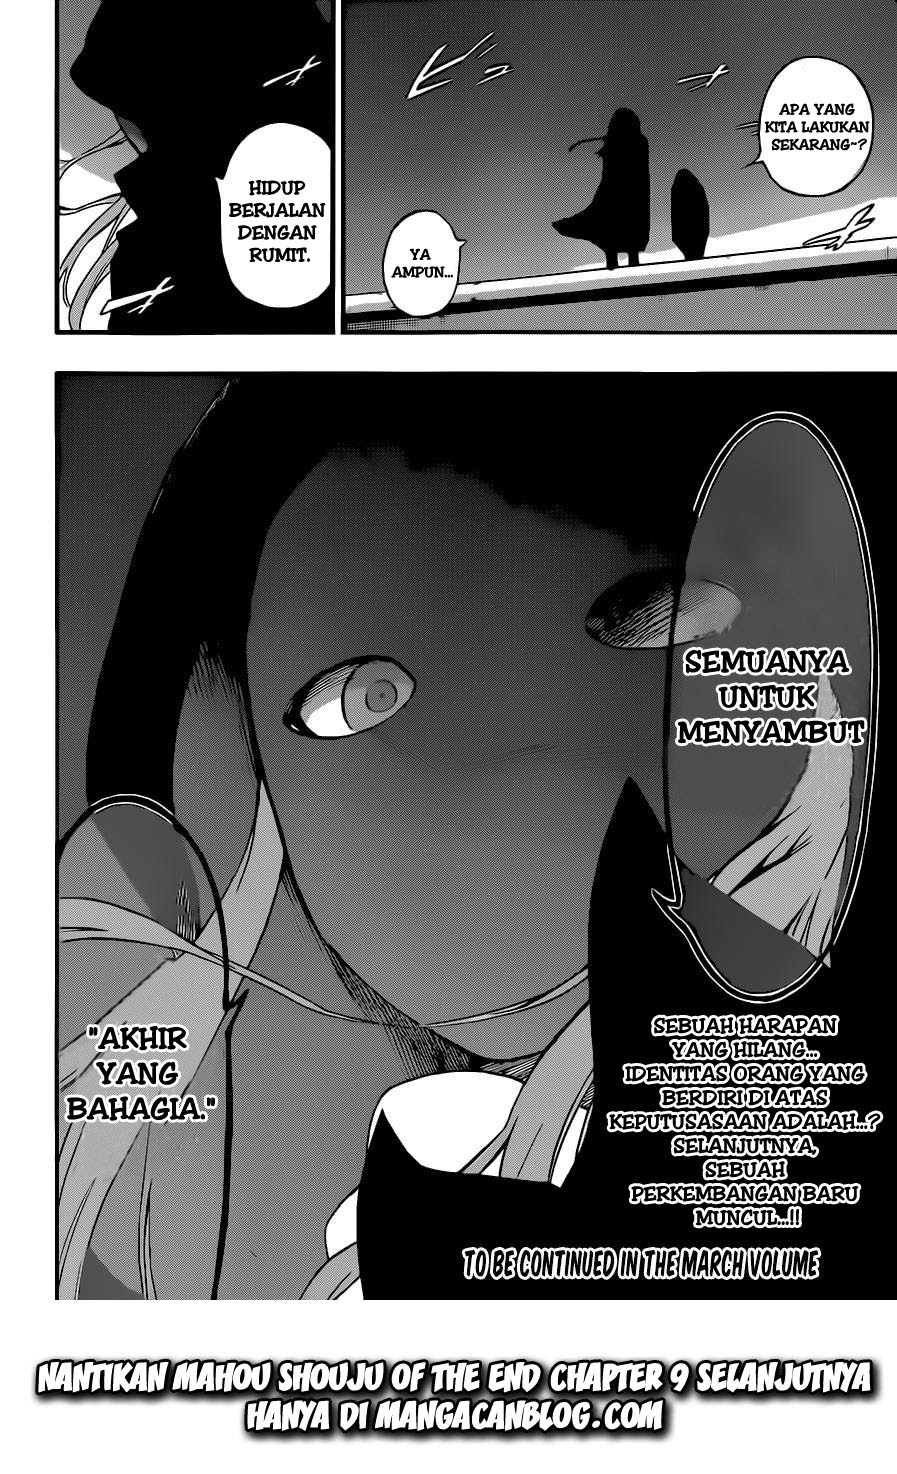 Mahou Shoujo of the End Chapter 8